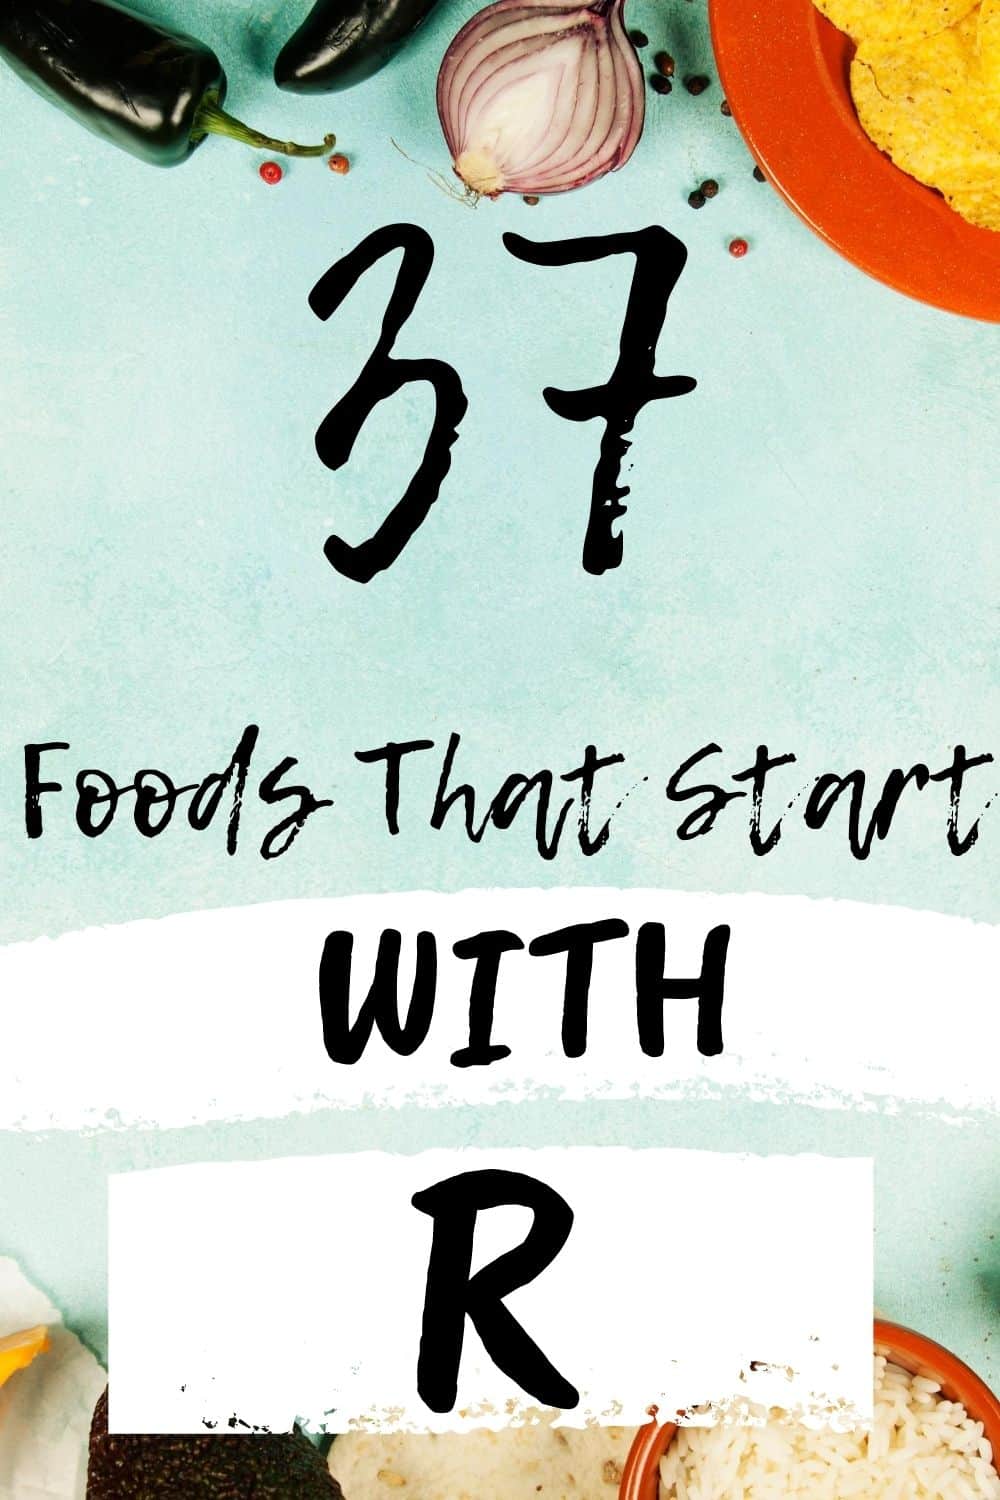 37 Foods That Start With R »